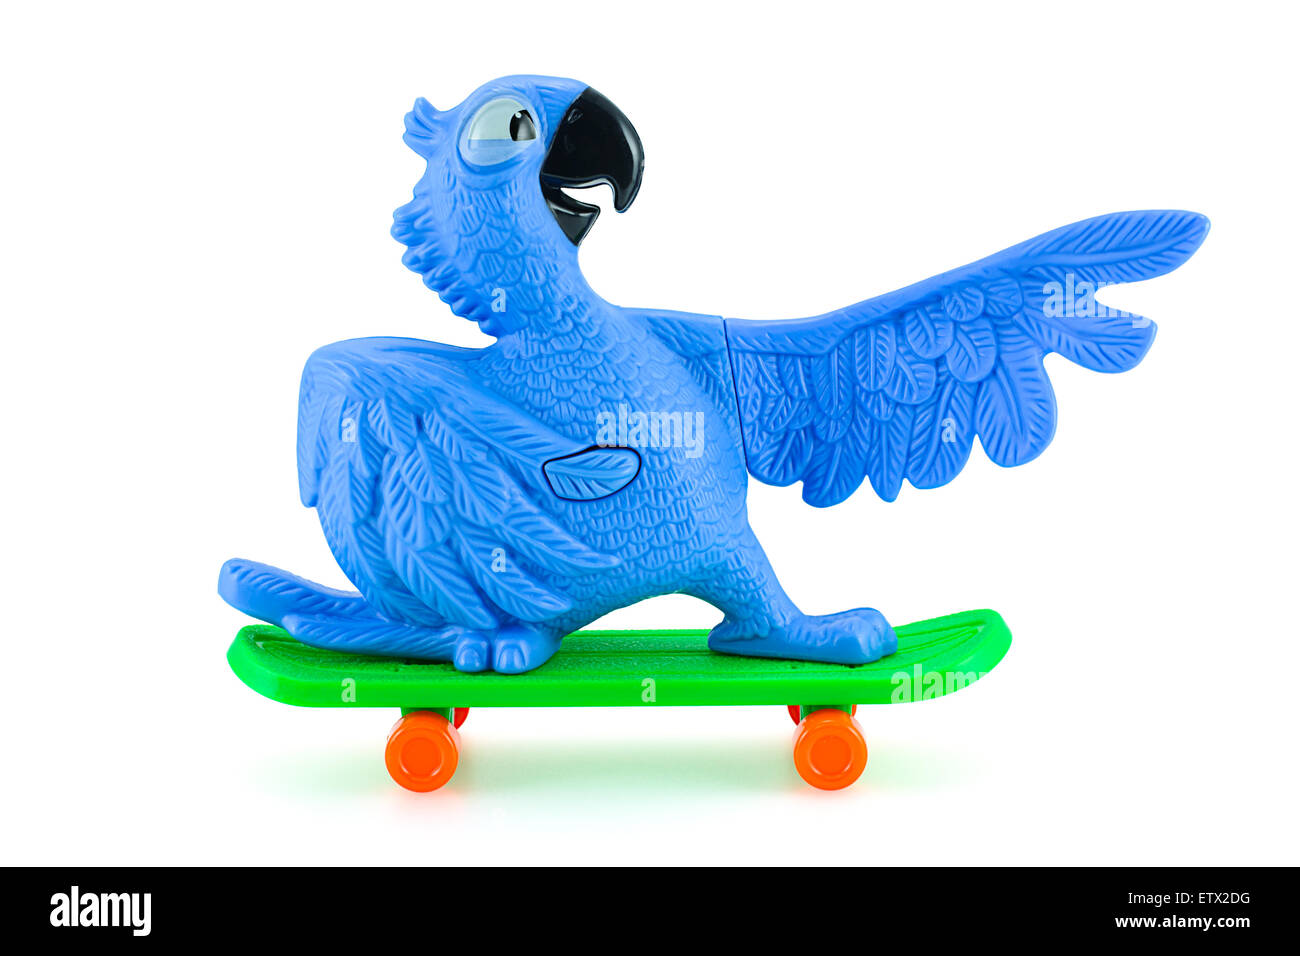 Bangkok,Thailand - February 24, 2015: Blu the blue macaws on skateboard toy  character form RIO animation film. There are plastic Stock Photo - Alamy